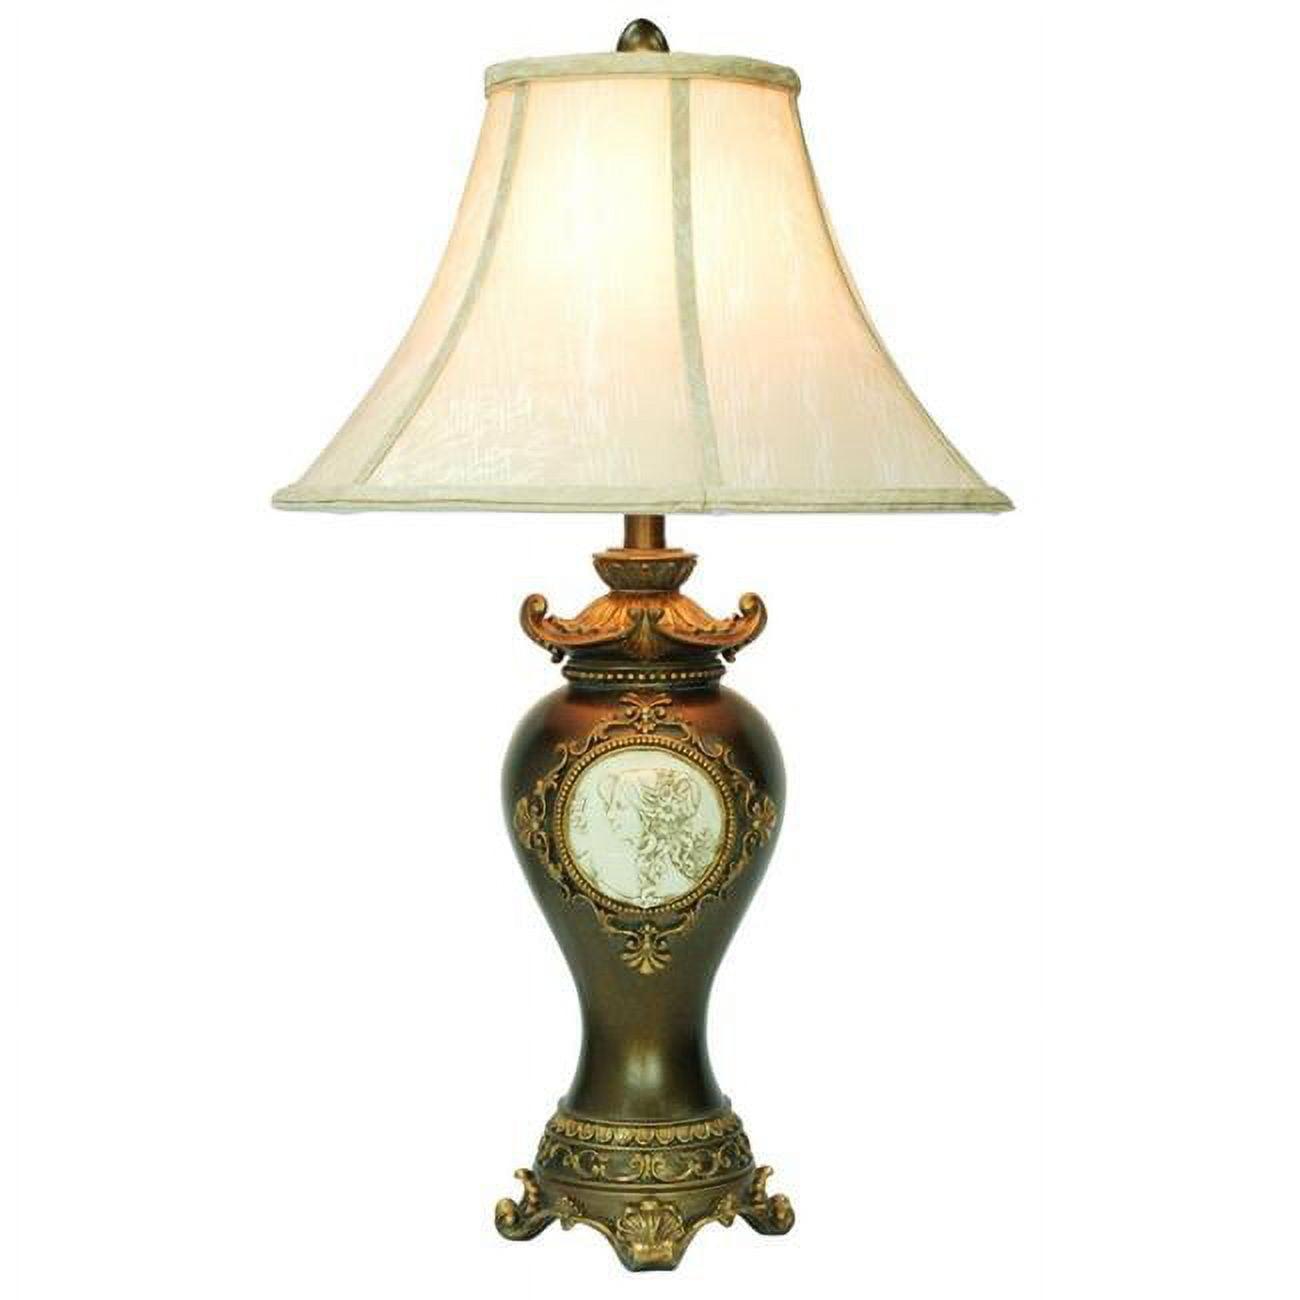 Classical Greek Engraved Table Lamp with Espresso Finish and Off-White Shade